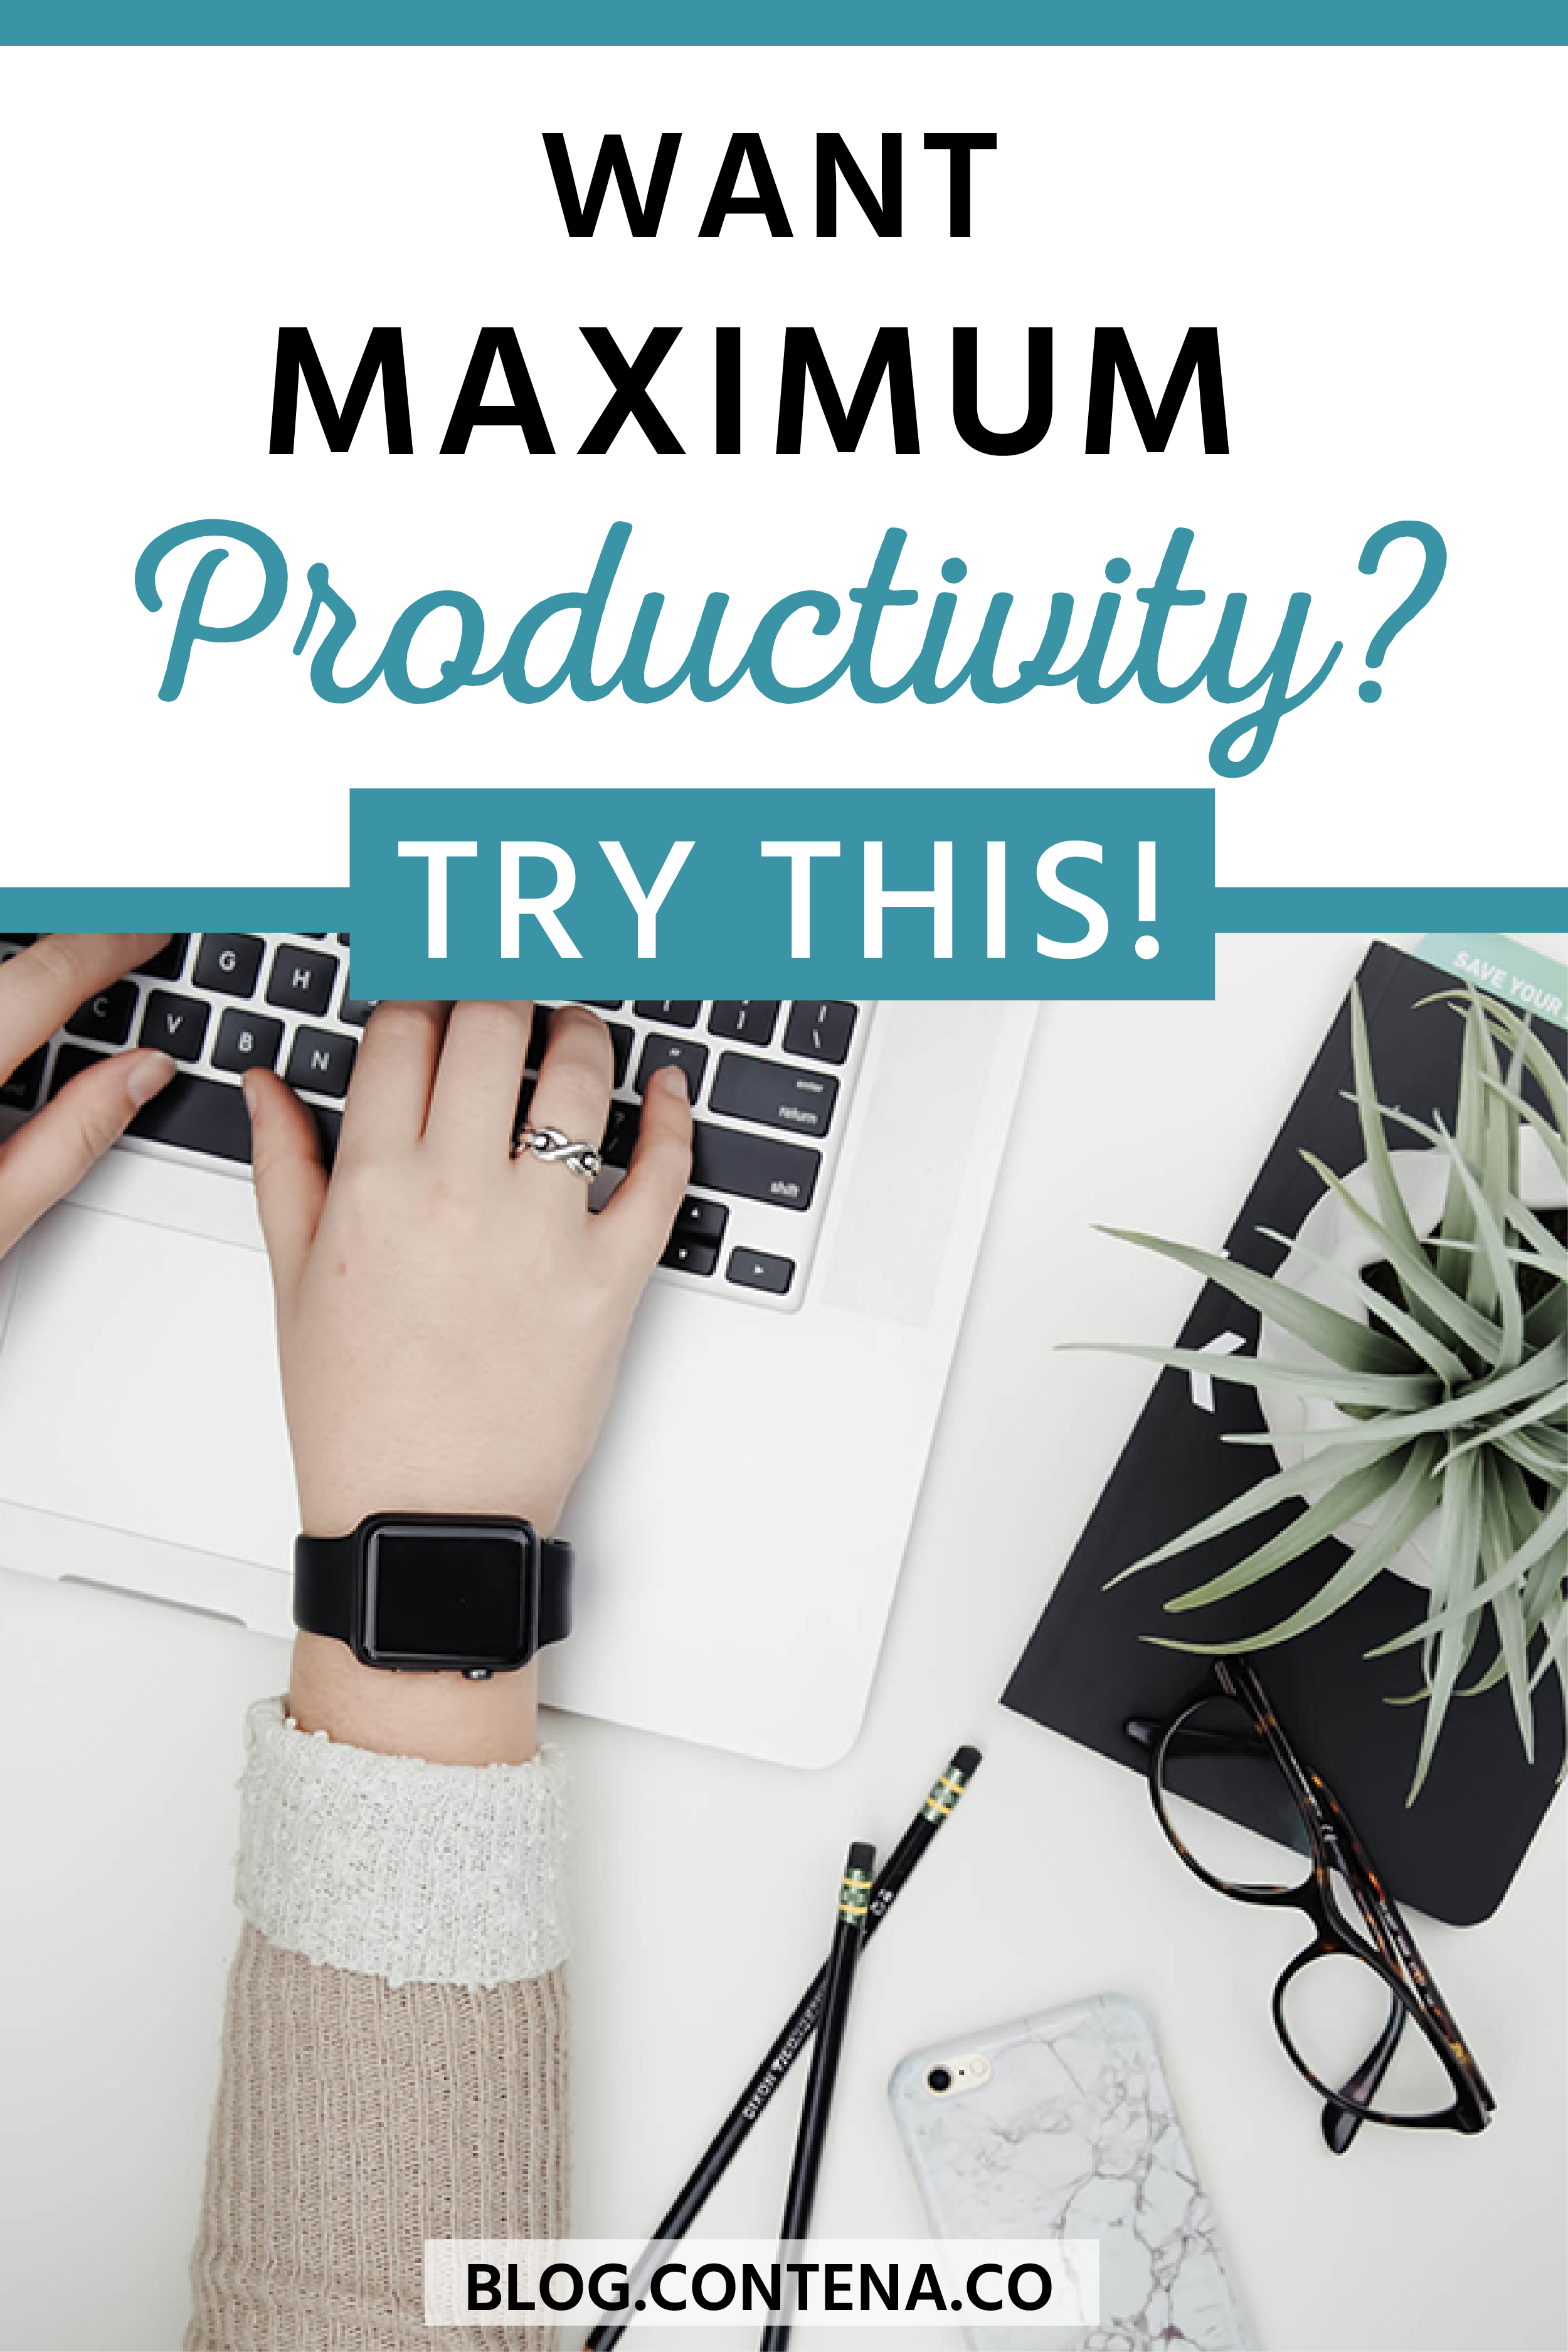 Check out these productivity tips and hacks for freelance writers. Boost your productivity and make more money with these unique productivity tips. #Productivity #FreelanceWriting #Freelancer #WorkFromHome #SideHustle #Money #OnlineBusiness #Writing #WritingJobs #Money